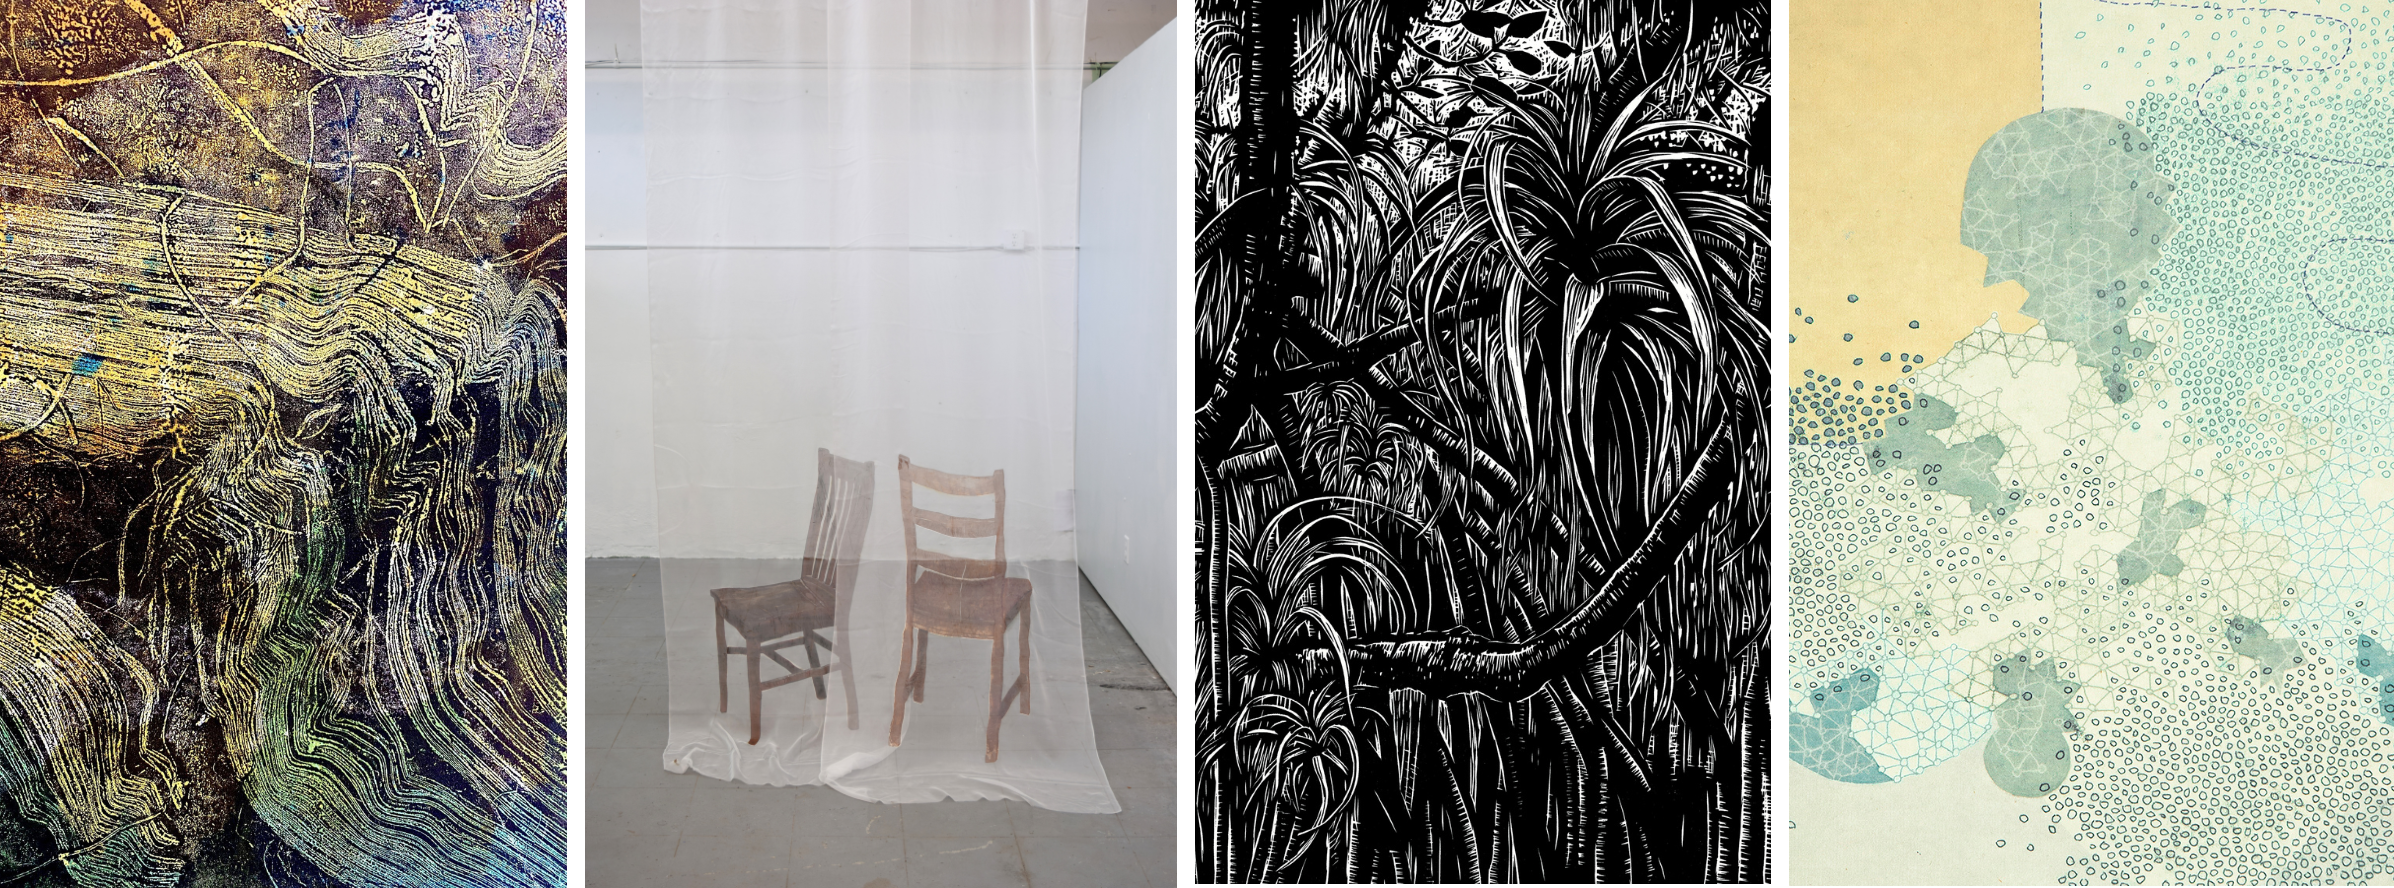 images : John Schilling “Untitled 2" monotype, 6"x8" 2022; Emily Gui "Chairs" screen print on silk, 60 x 192 (height variable), 2019; Mollie Doctrow "In the Mangroves", woodcut, 18"x14", 2019 ; Sarah Smelser "Defying the Laws I" monotype, 20 x 16 in 2019.